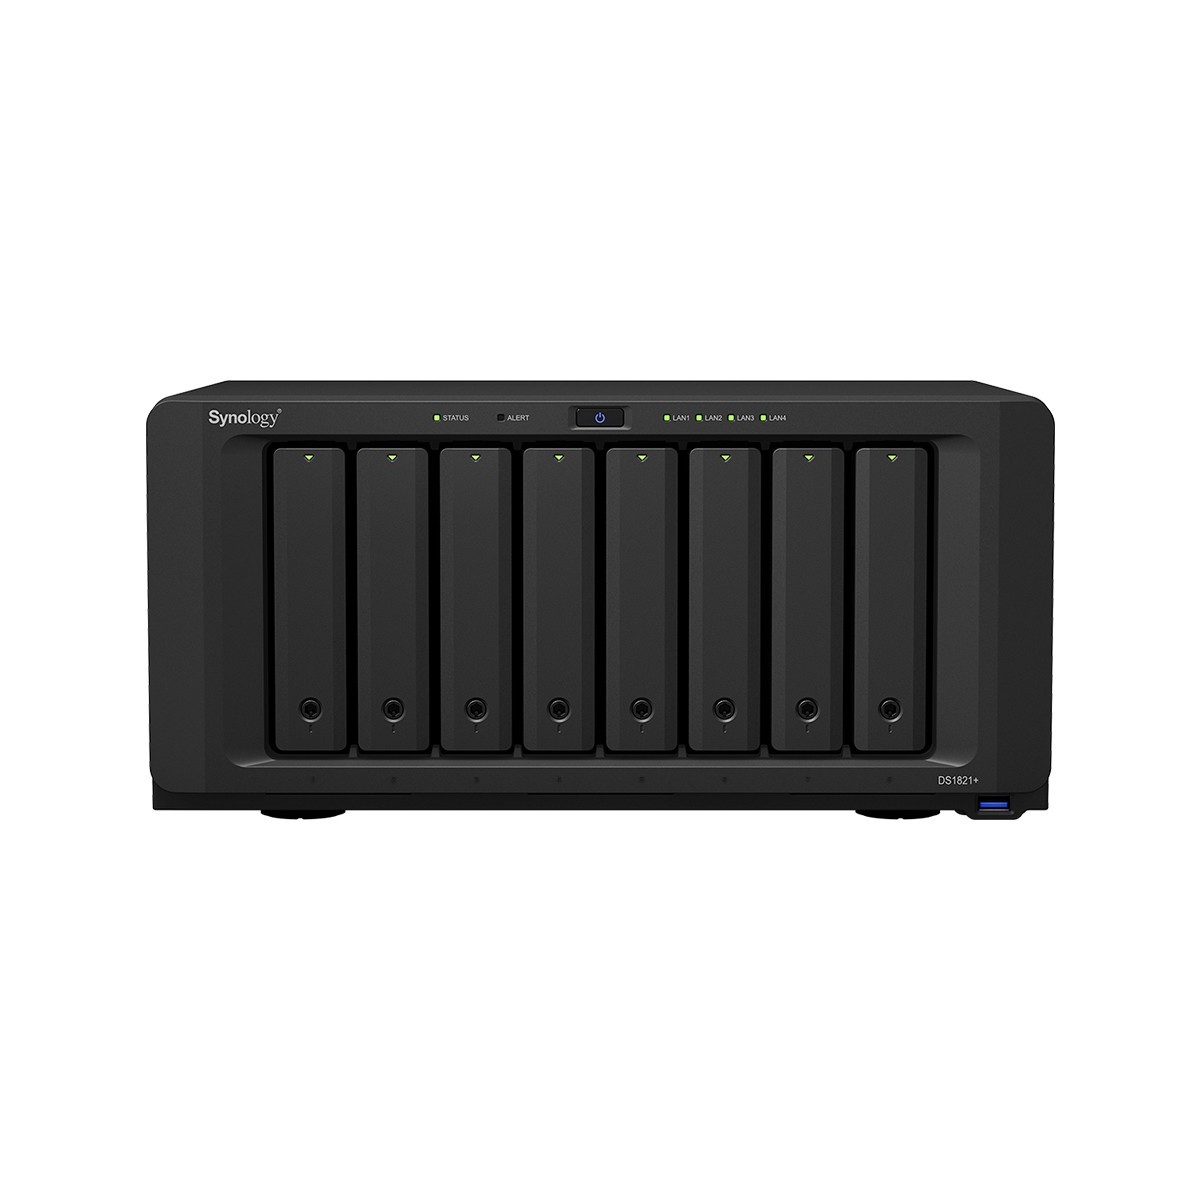 Synology Kit DS1821+ -+ 8x Seagate NAS HDD IronWolf Pro 4TB 7.2K SATA - NAS